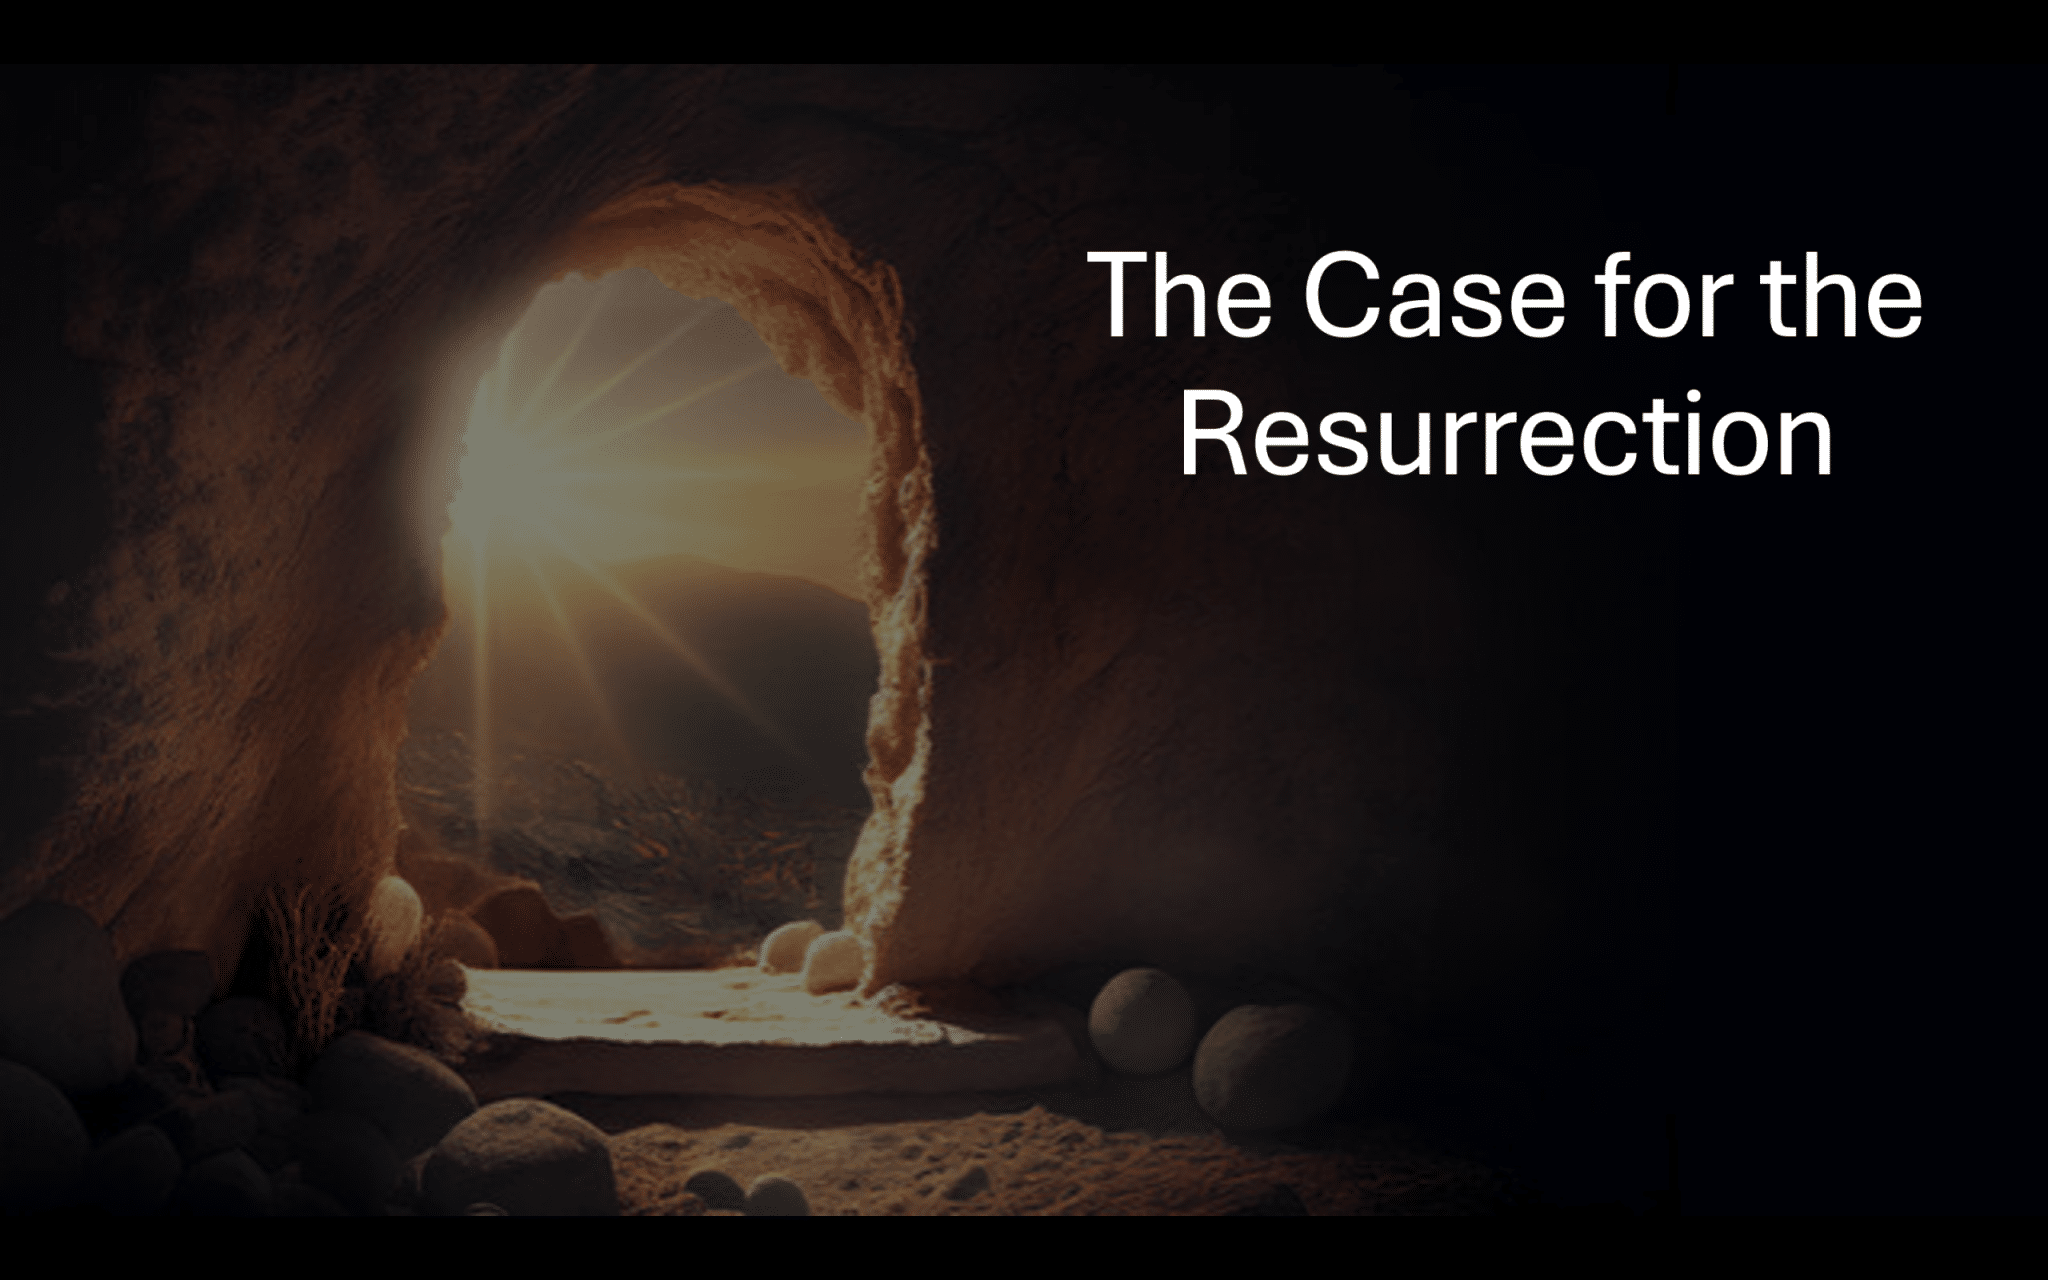 The Case for the Resurrection